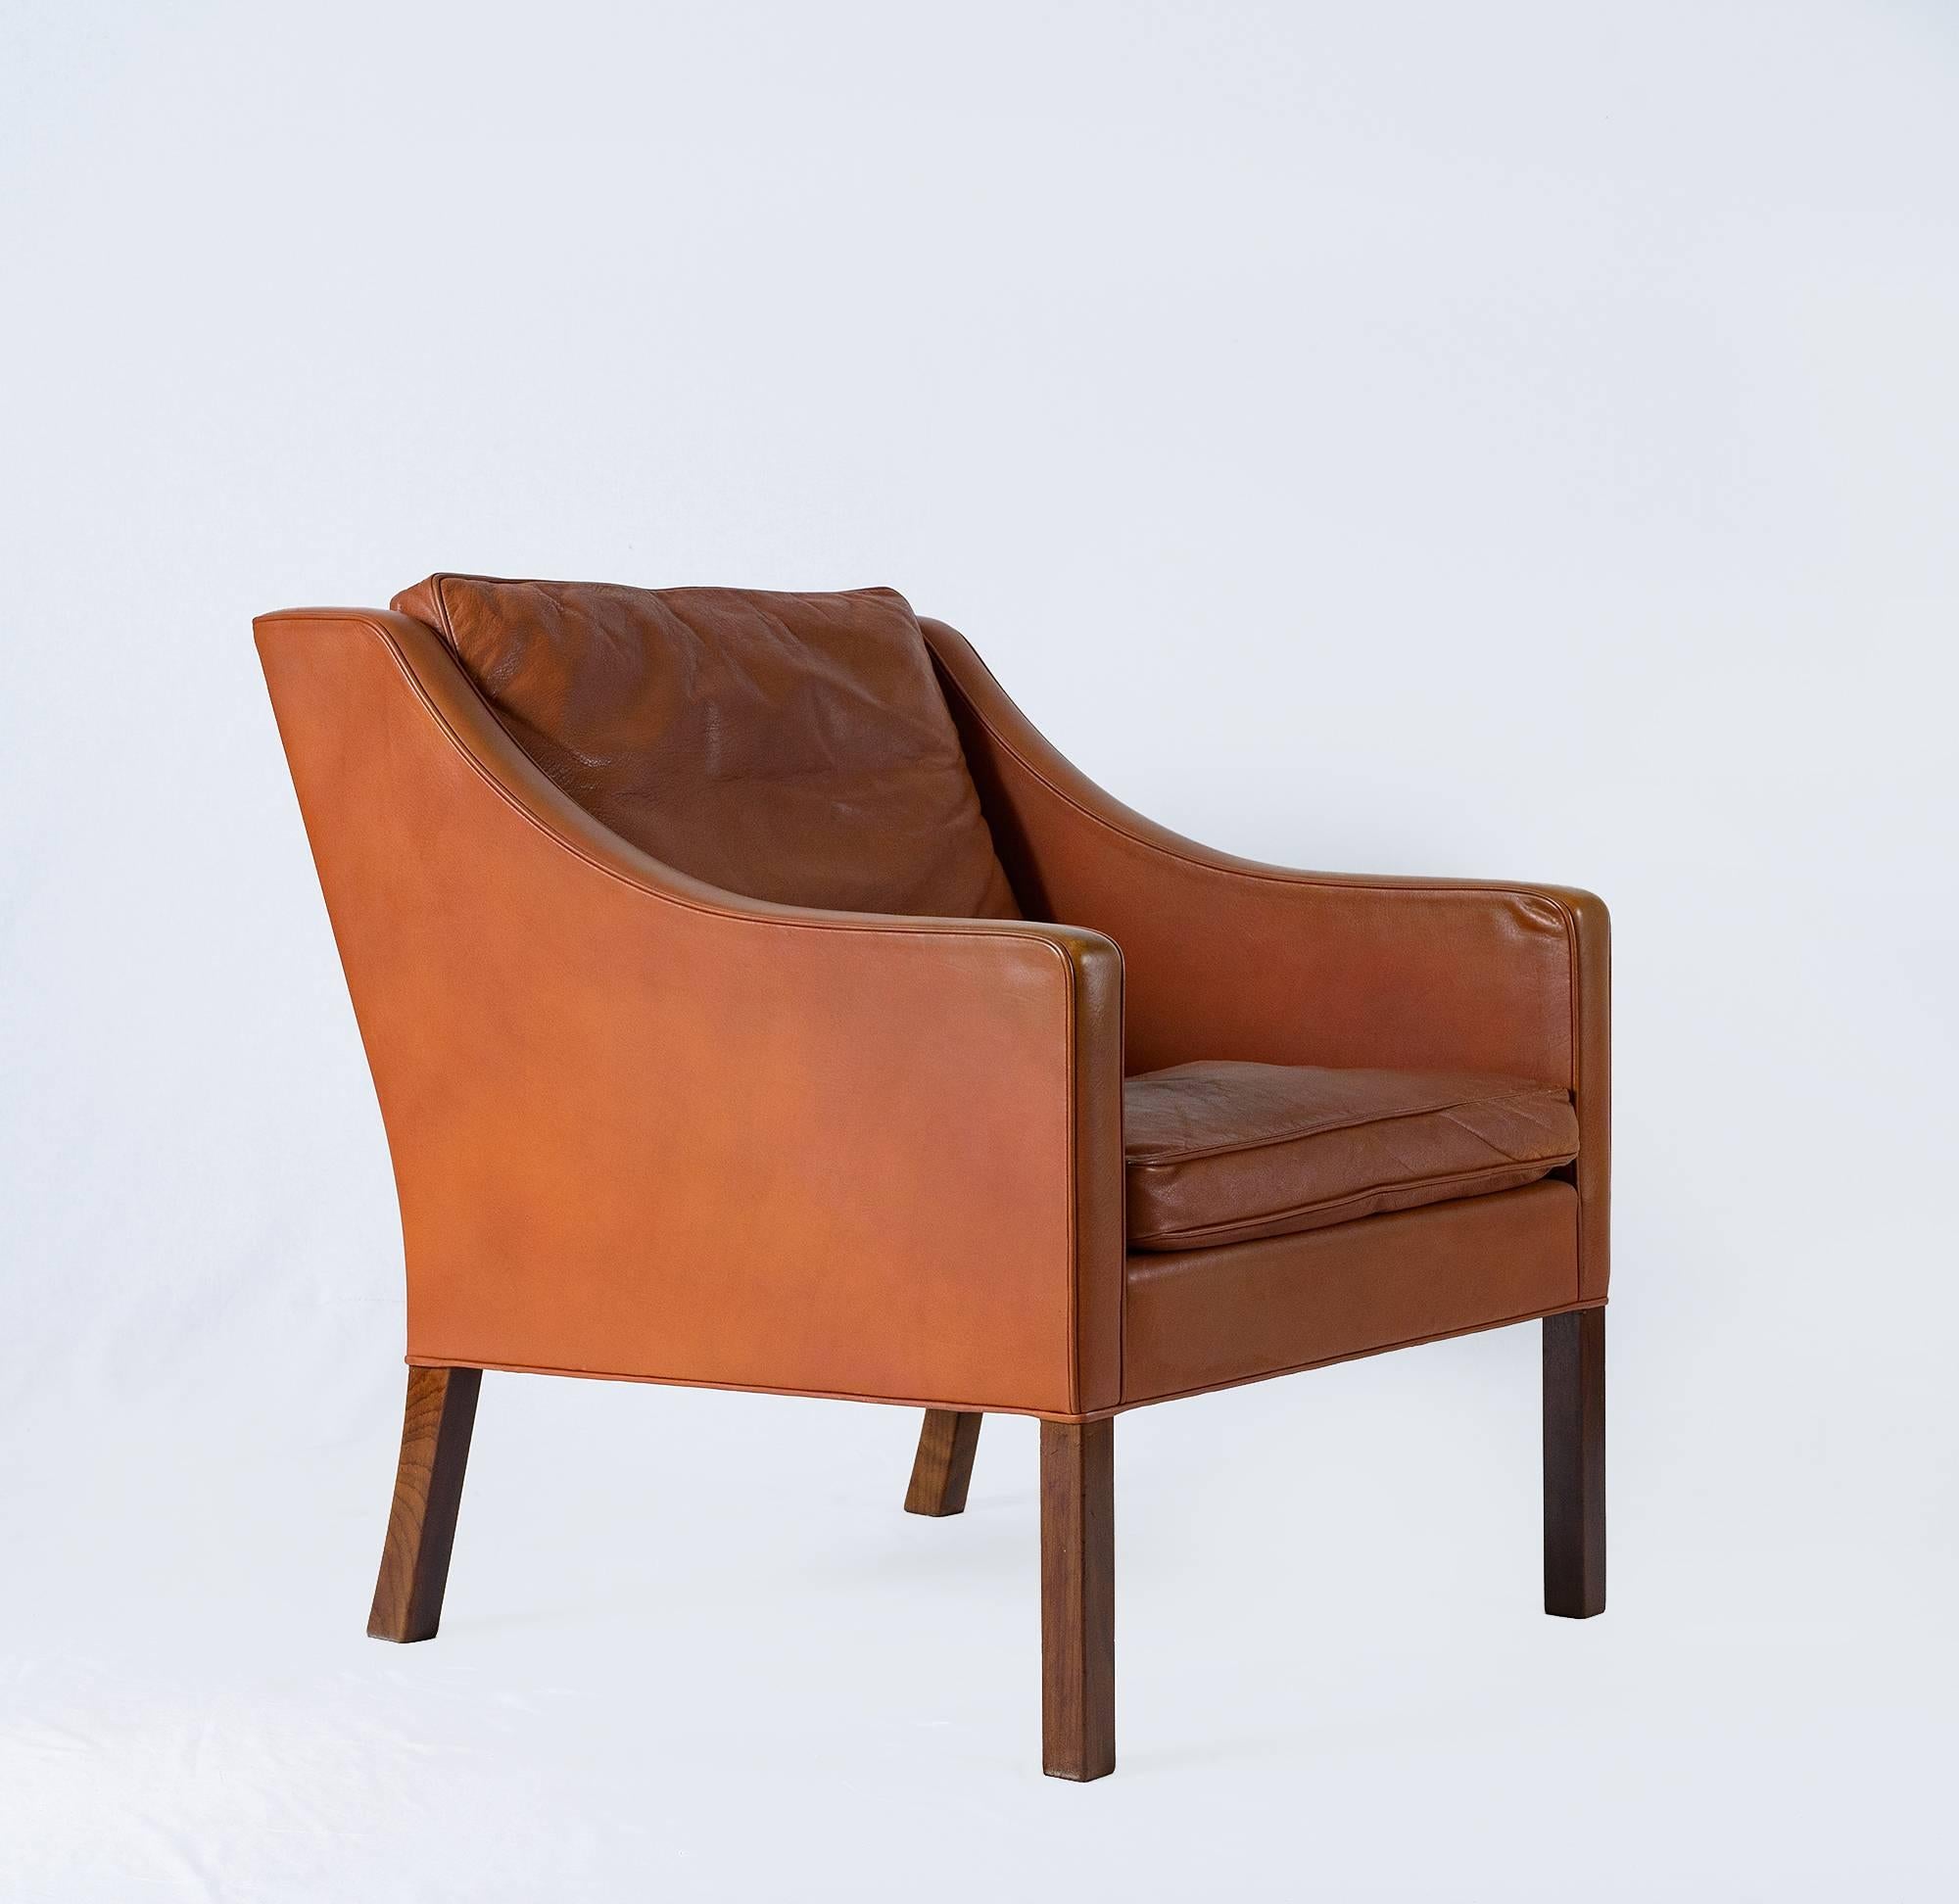 Børge Mogensen model #2207 leather lounge chair designed in 1963 and produced by Fredericia.